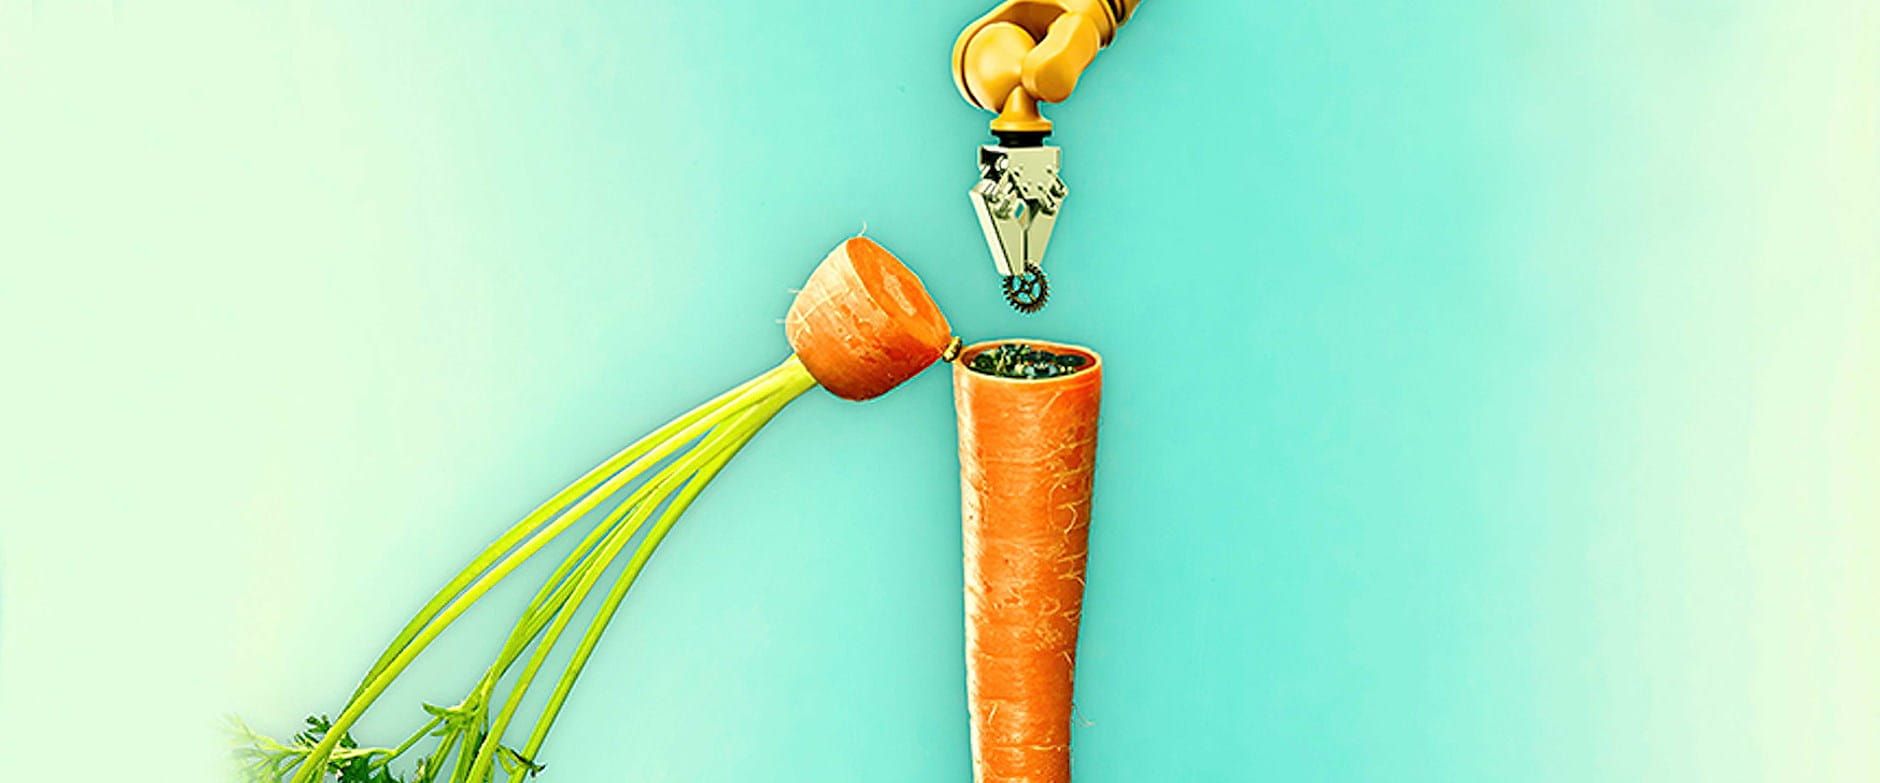 Mechanical arms holding a carrot